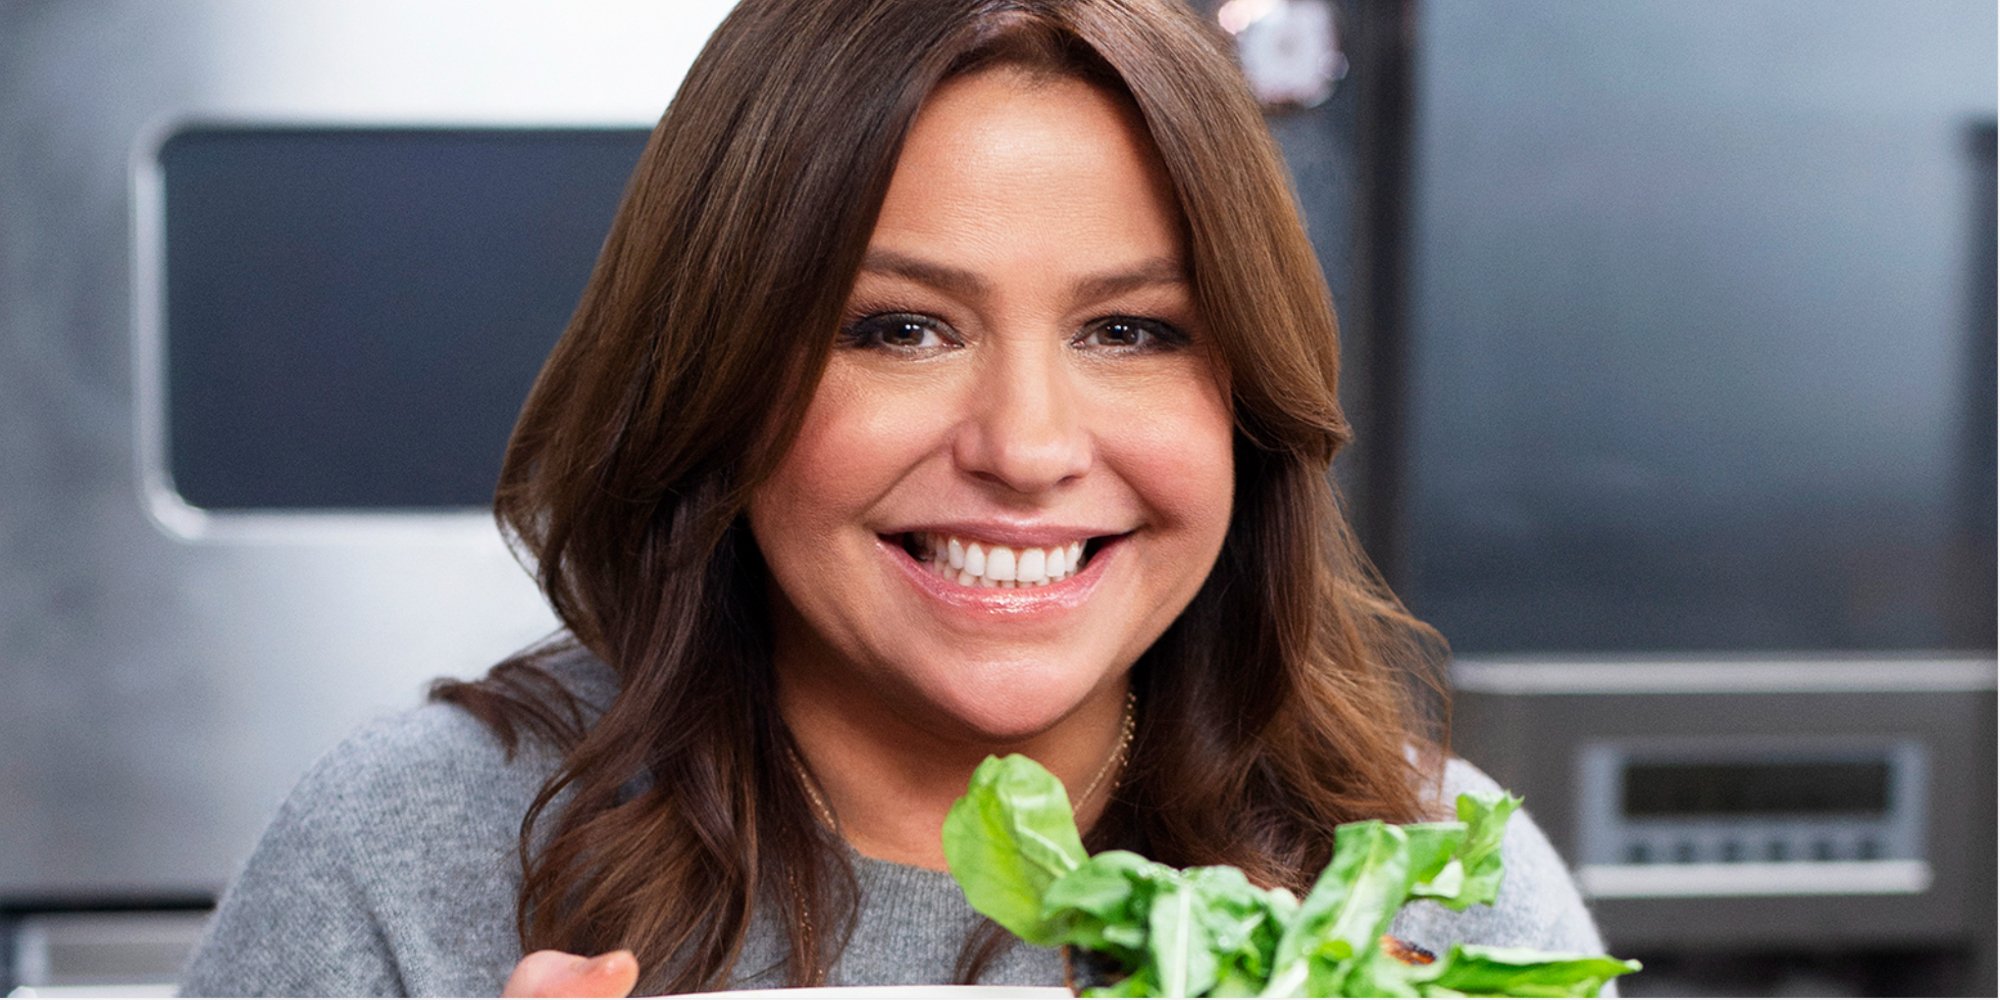 Rachael Ray’s Perfect Meatball Recipe Is Freezer-Friendly and a Real Time-Saver